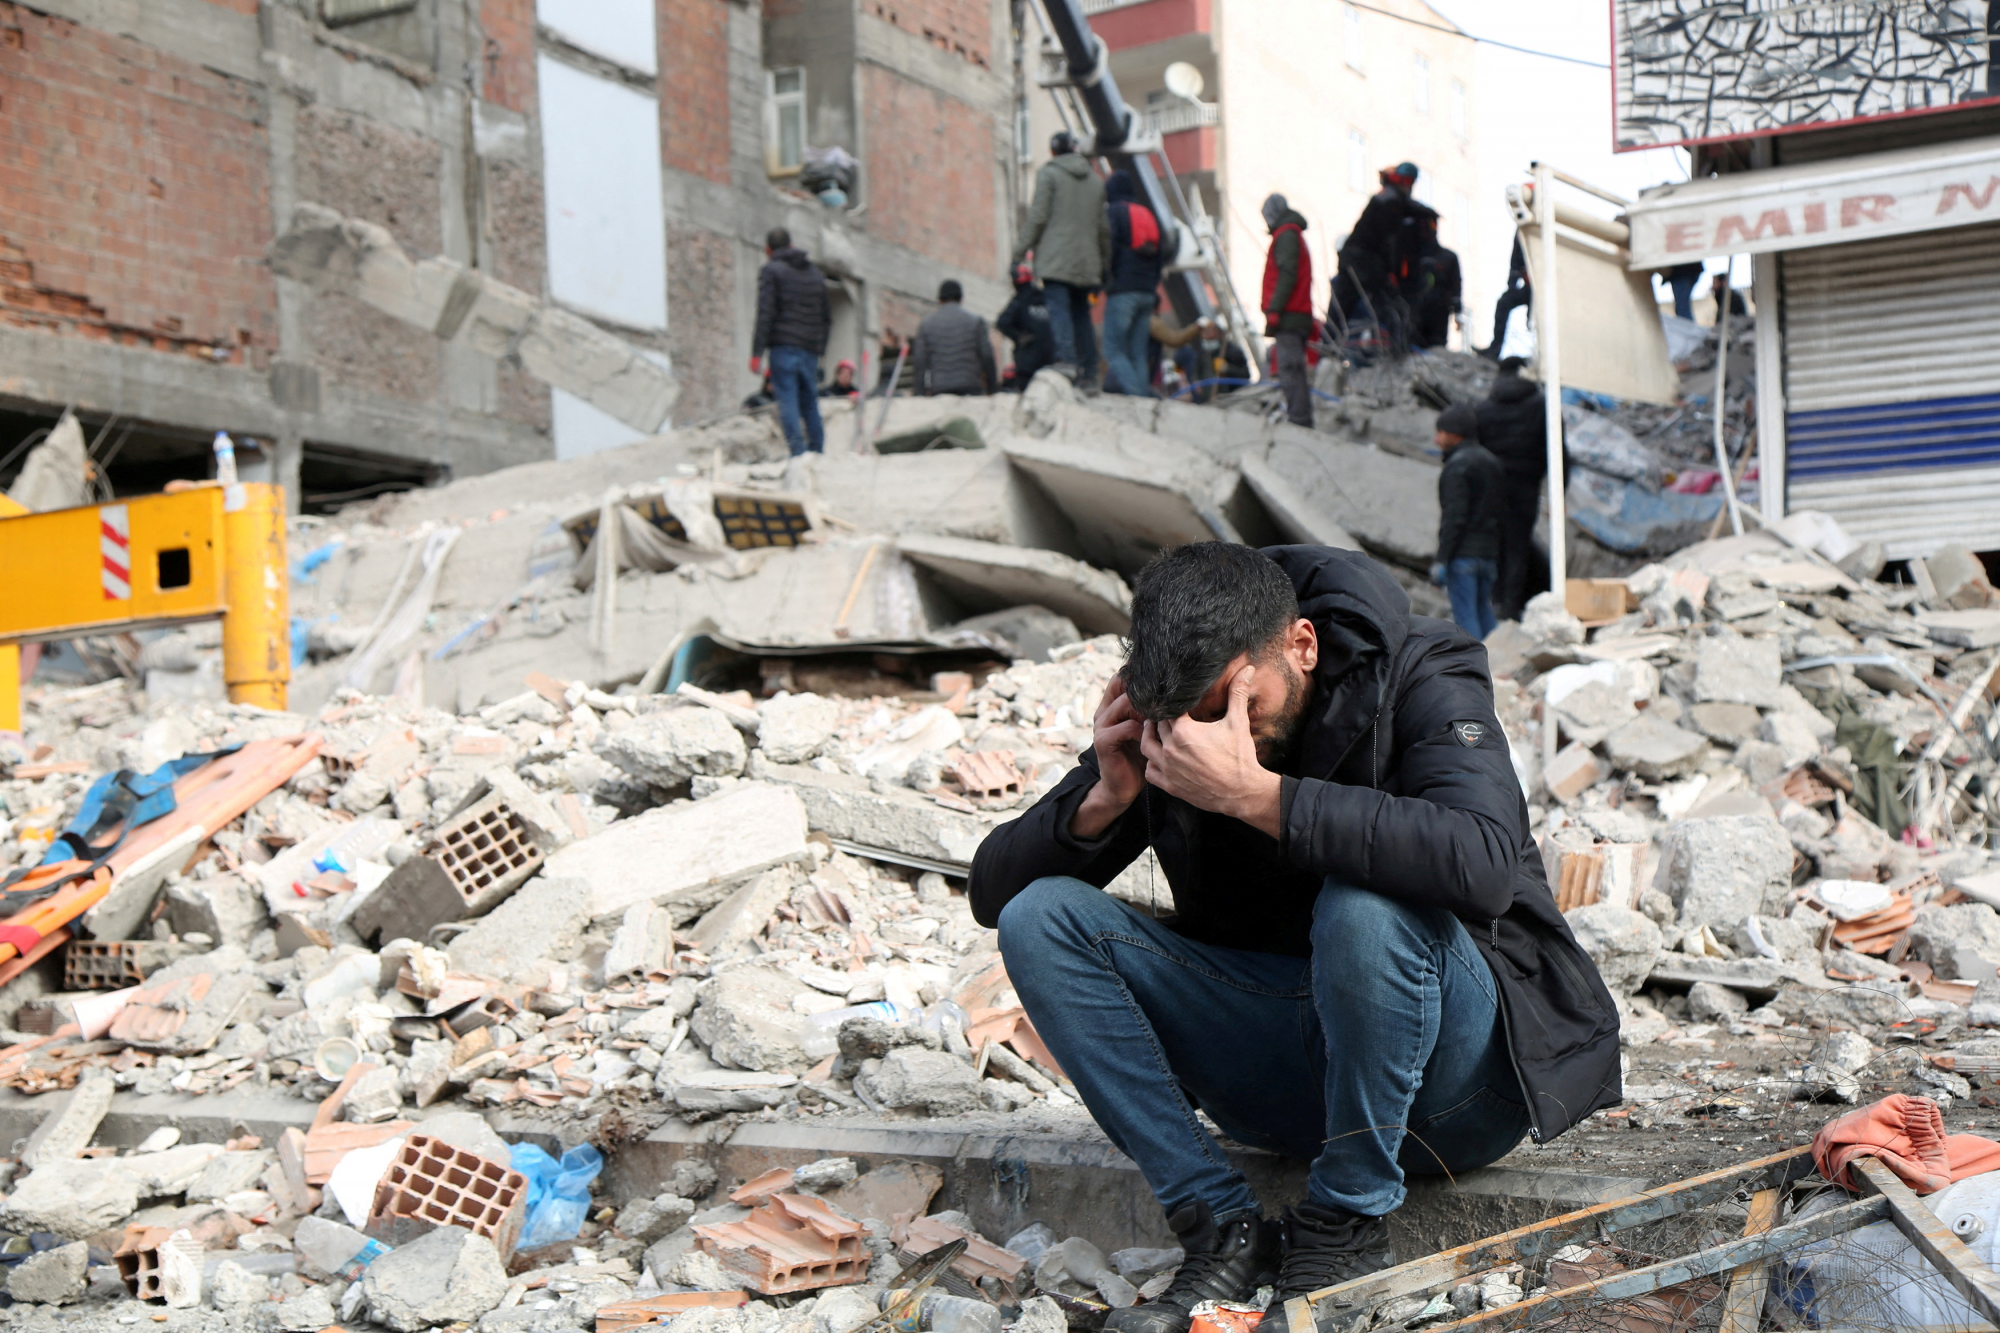 Greek state, private entities step up efforts to get aid to quake-stricken areas in SE Turkey